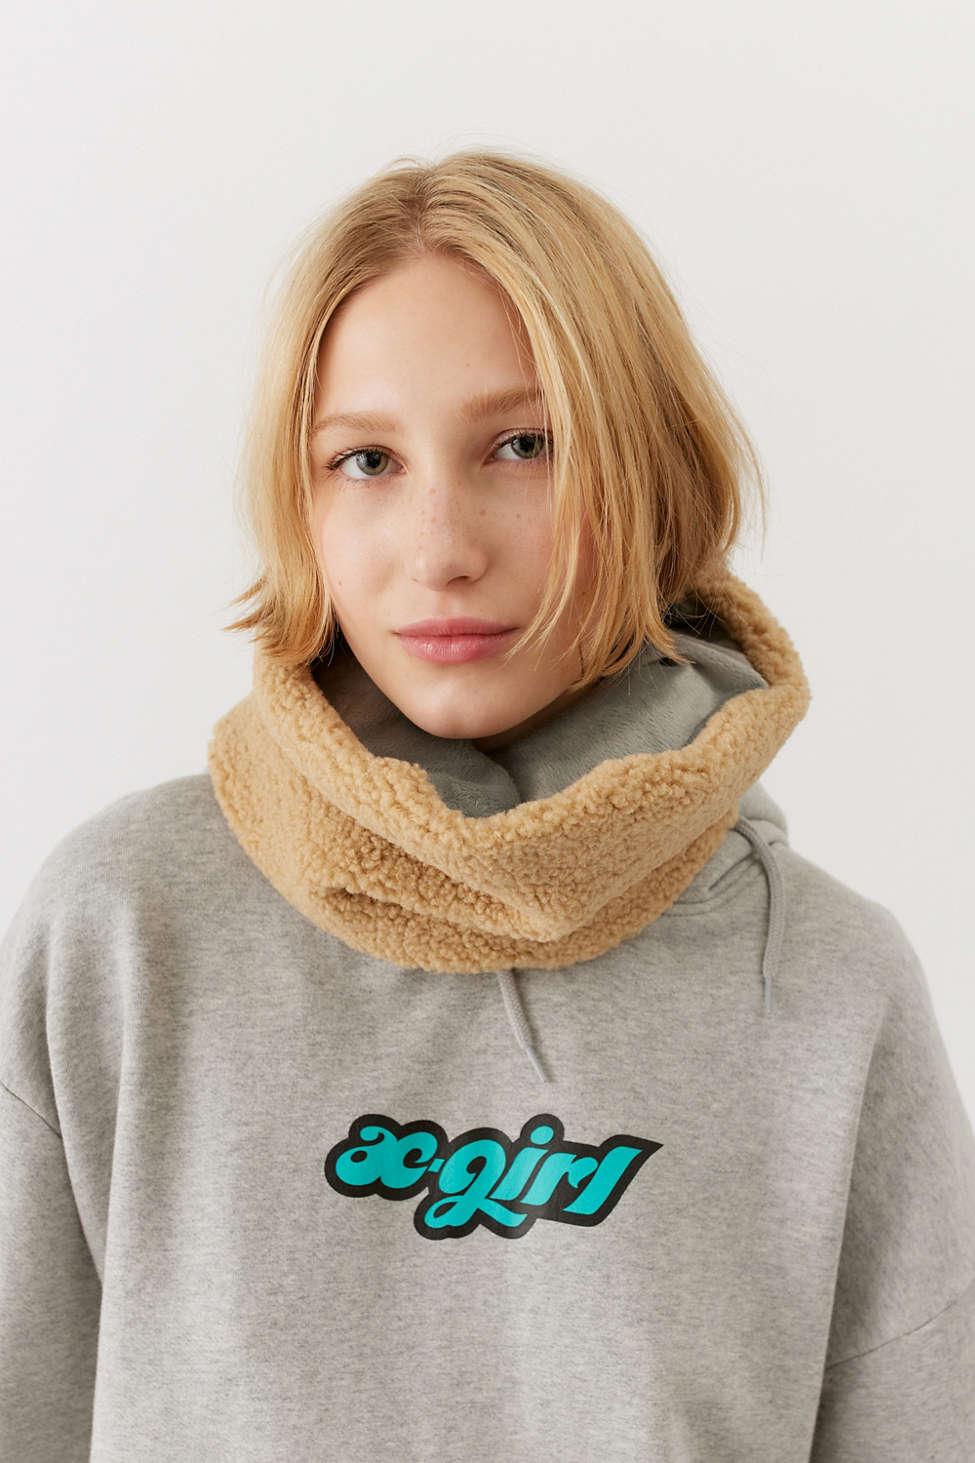 New Balance Sherpa Snood Scarf in Natural | Lyst